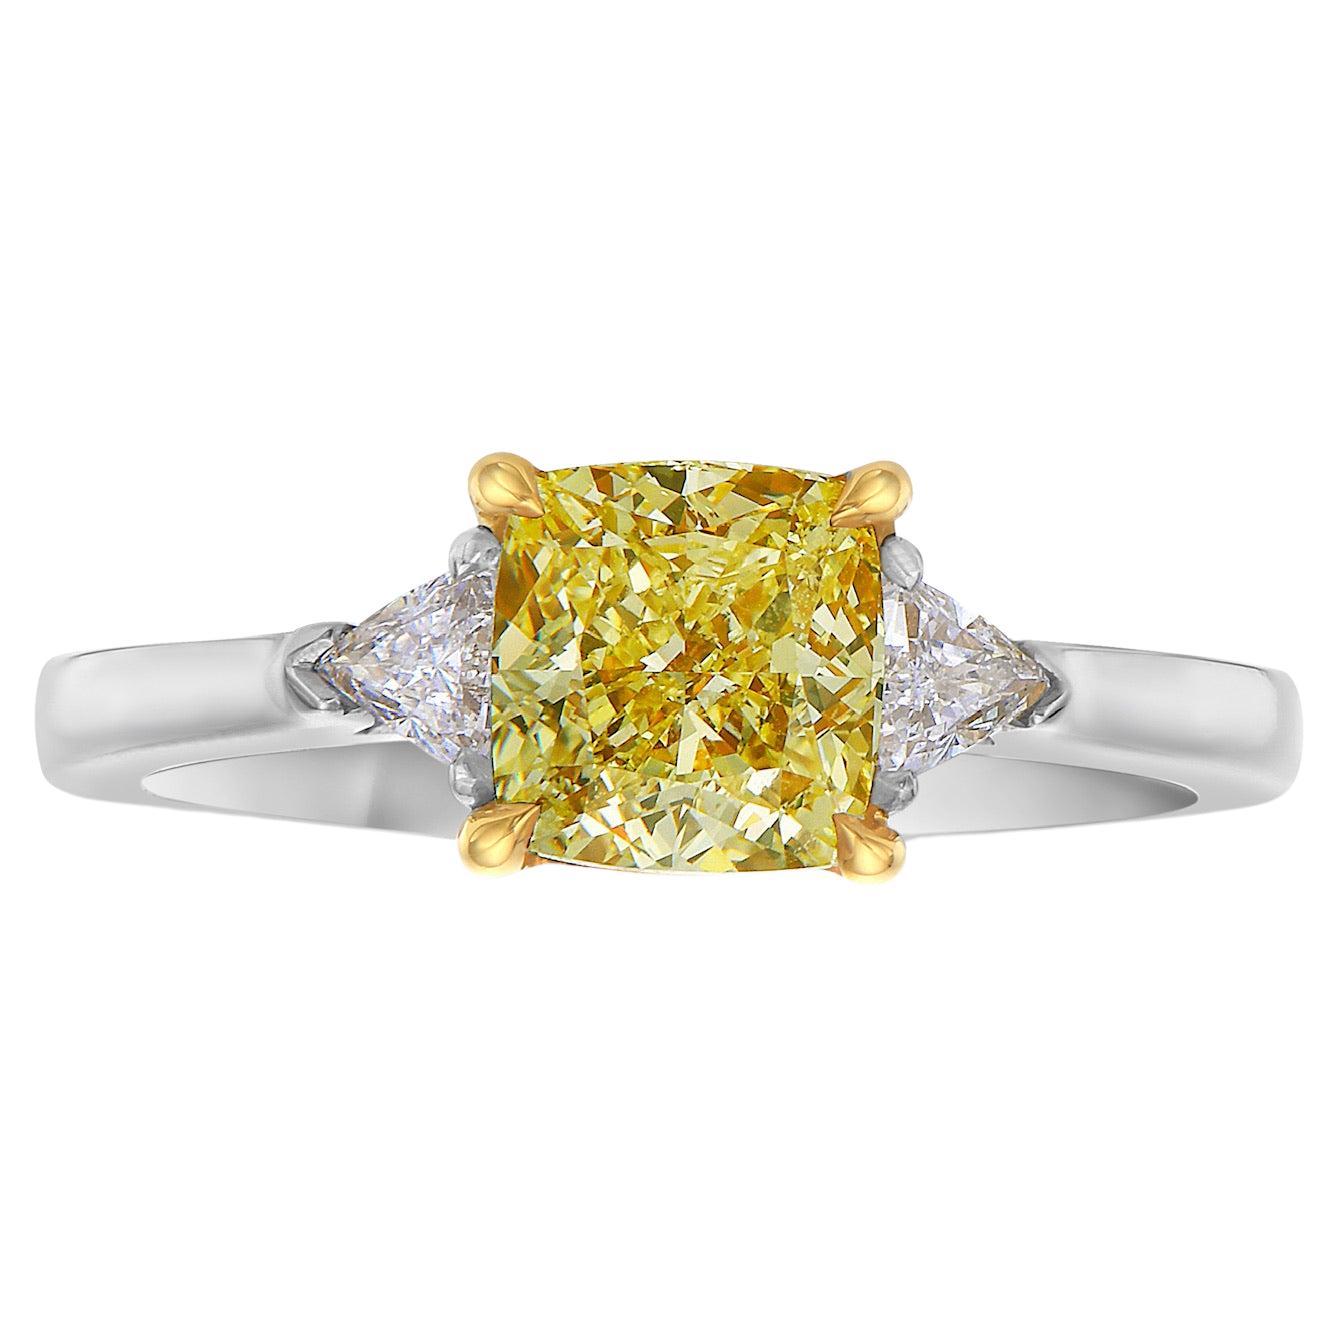 1.5 Carat Fancy Yellow Cushion Diamond Engagement Ring For Sale